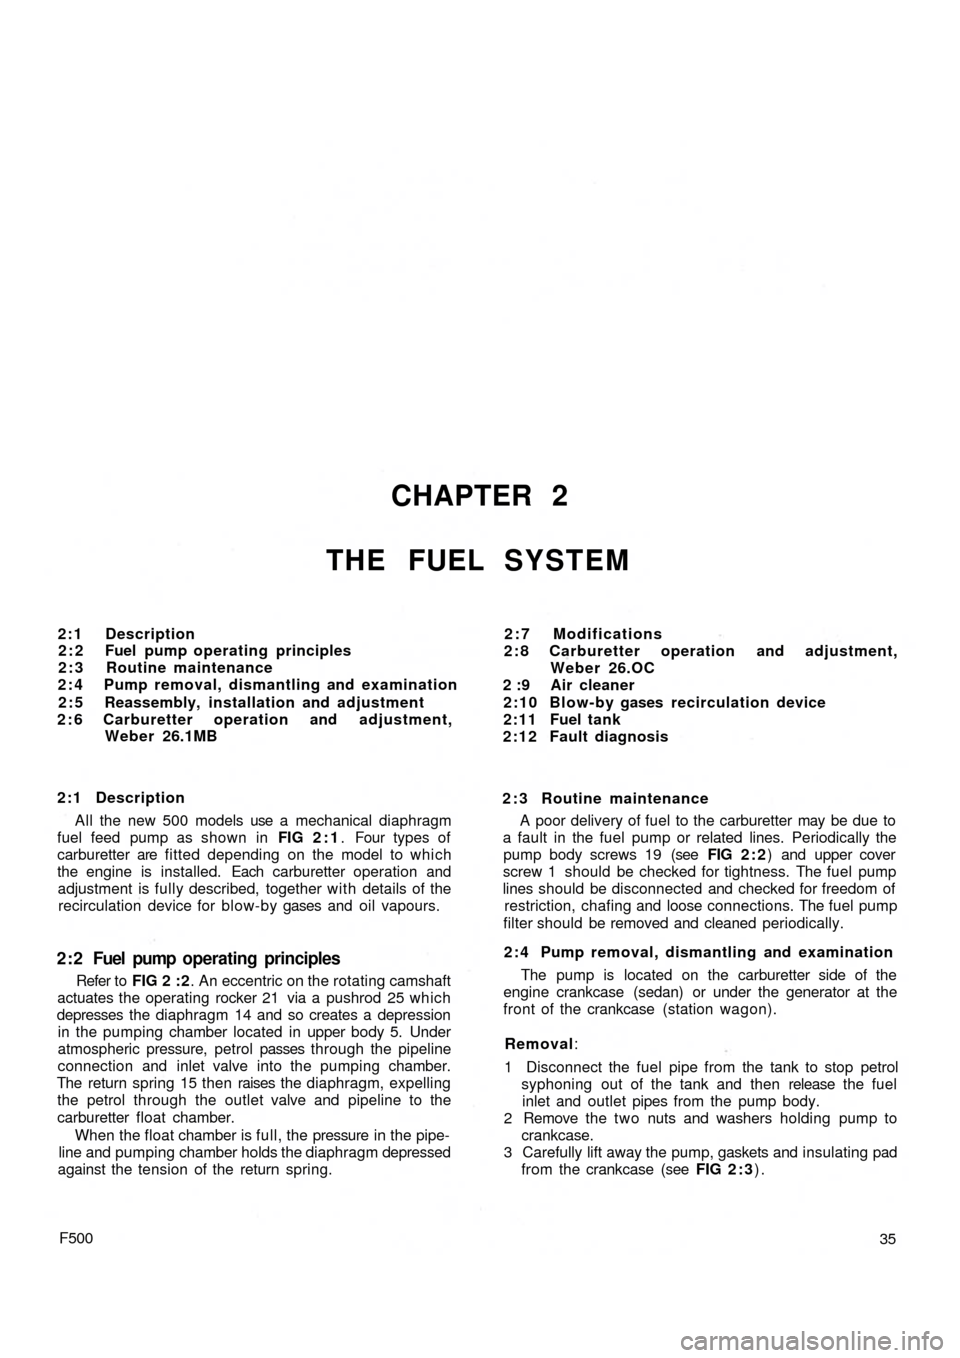 FIAT 500 1970 1.G Workshop Manual CHAPTER 2
THE FUEL SYSTEM
2:1 Description
2 : 2 Fuel pump operating principles
2 : 3 Routine maintenance
2 : 4 Pump removal, dismantling and examination
2 : 5 Reassembly, installation and adjustment
2